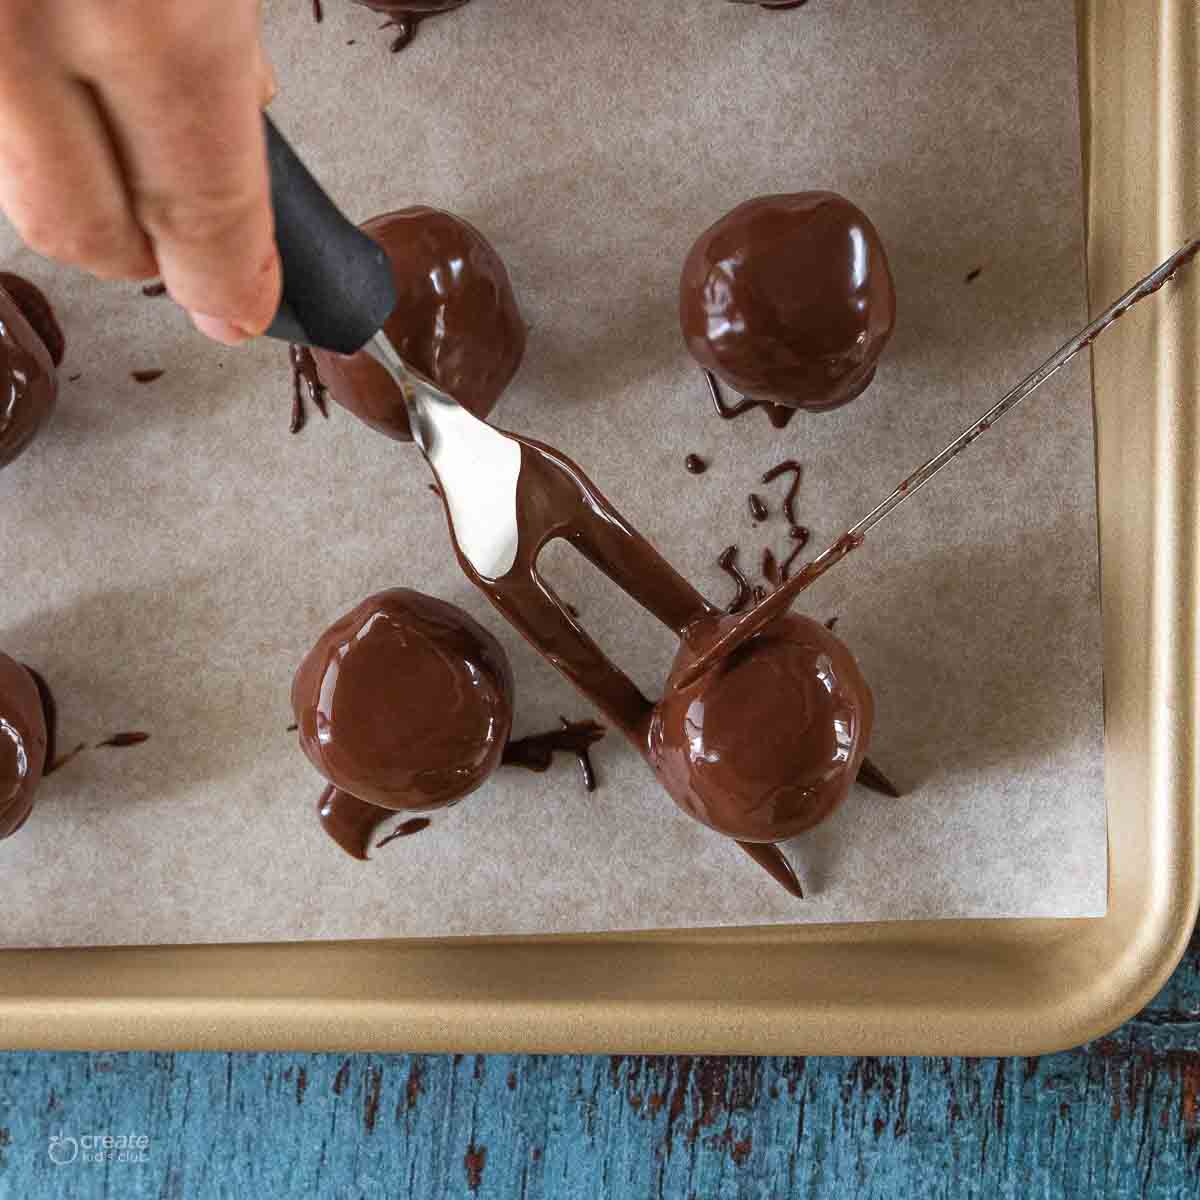 peanut butter balls dipped in chocolate and placed on sheet pan